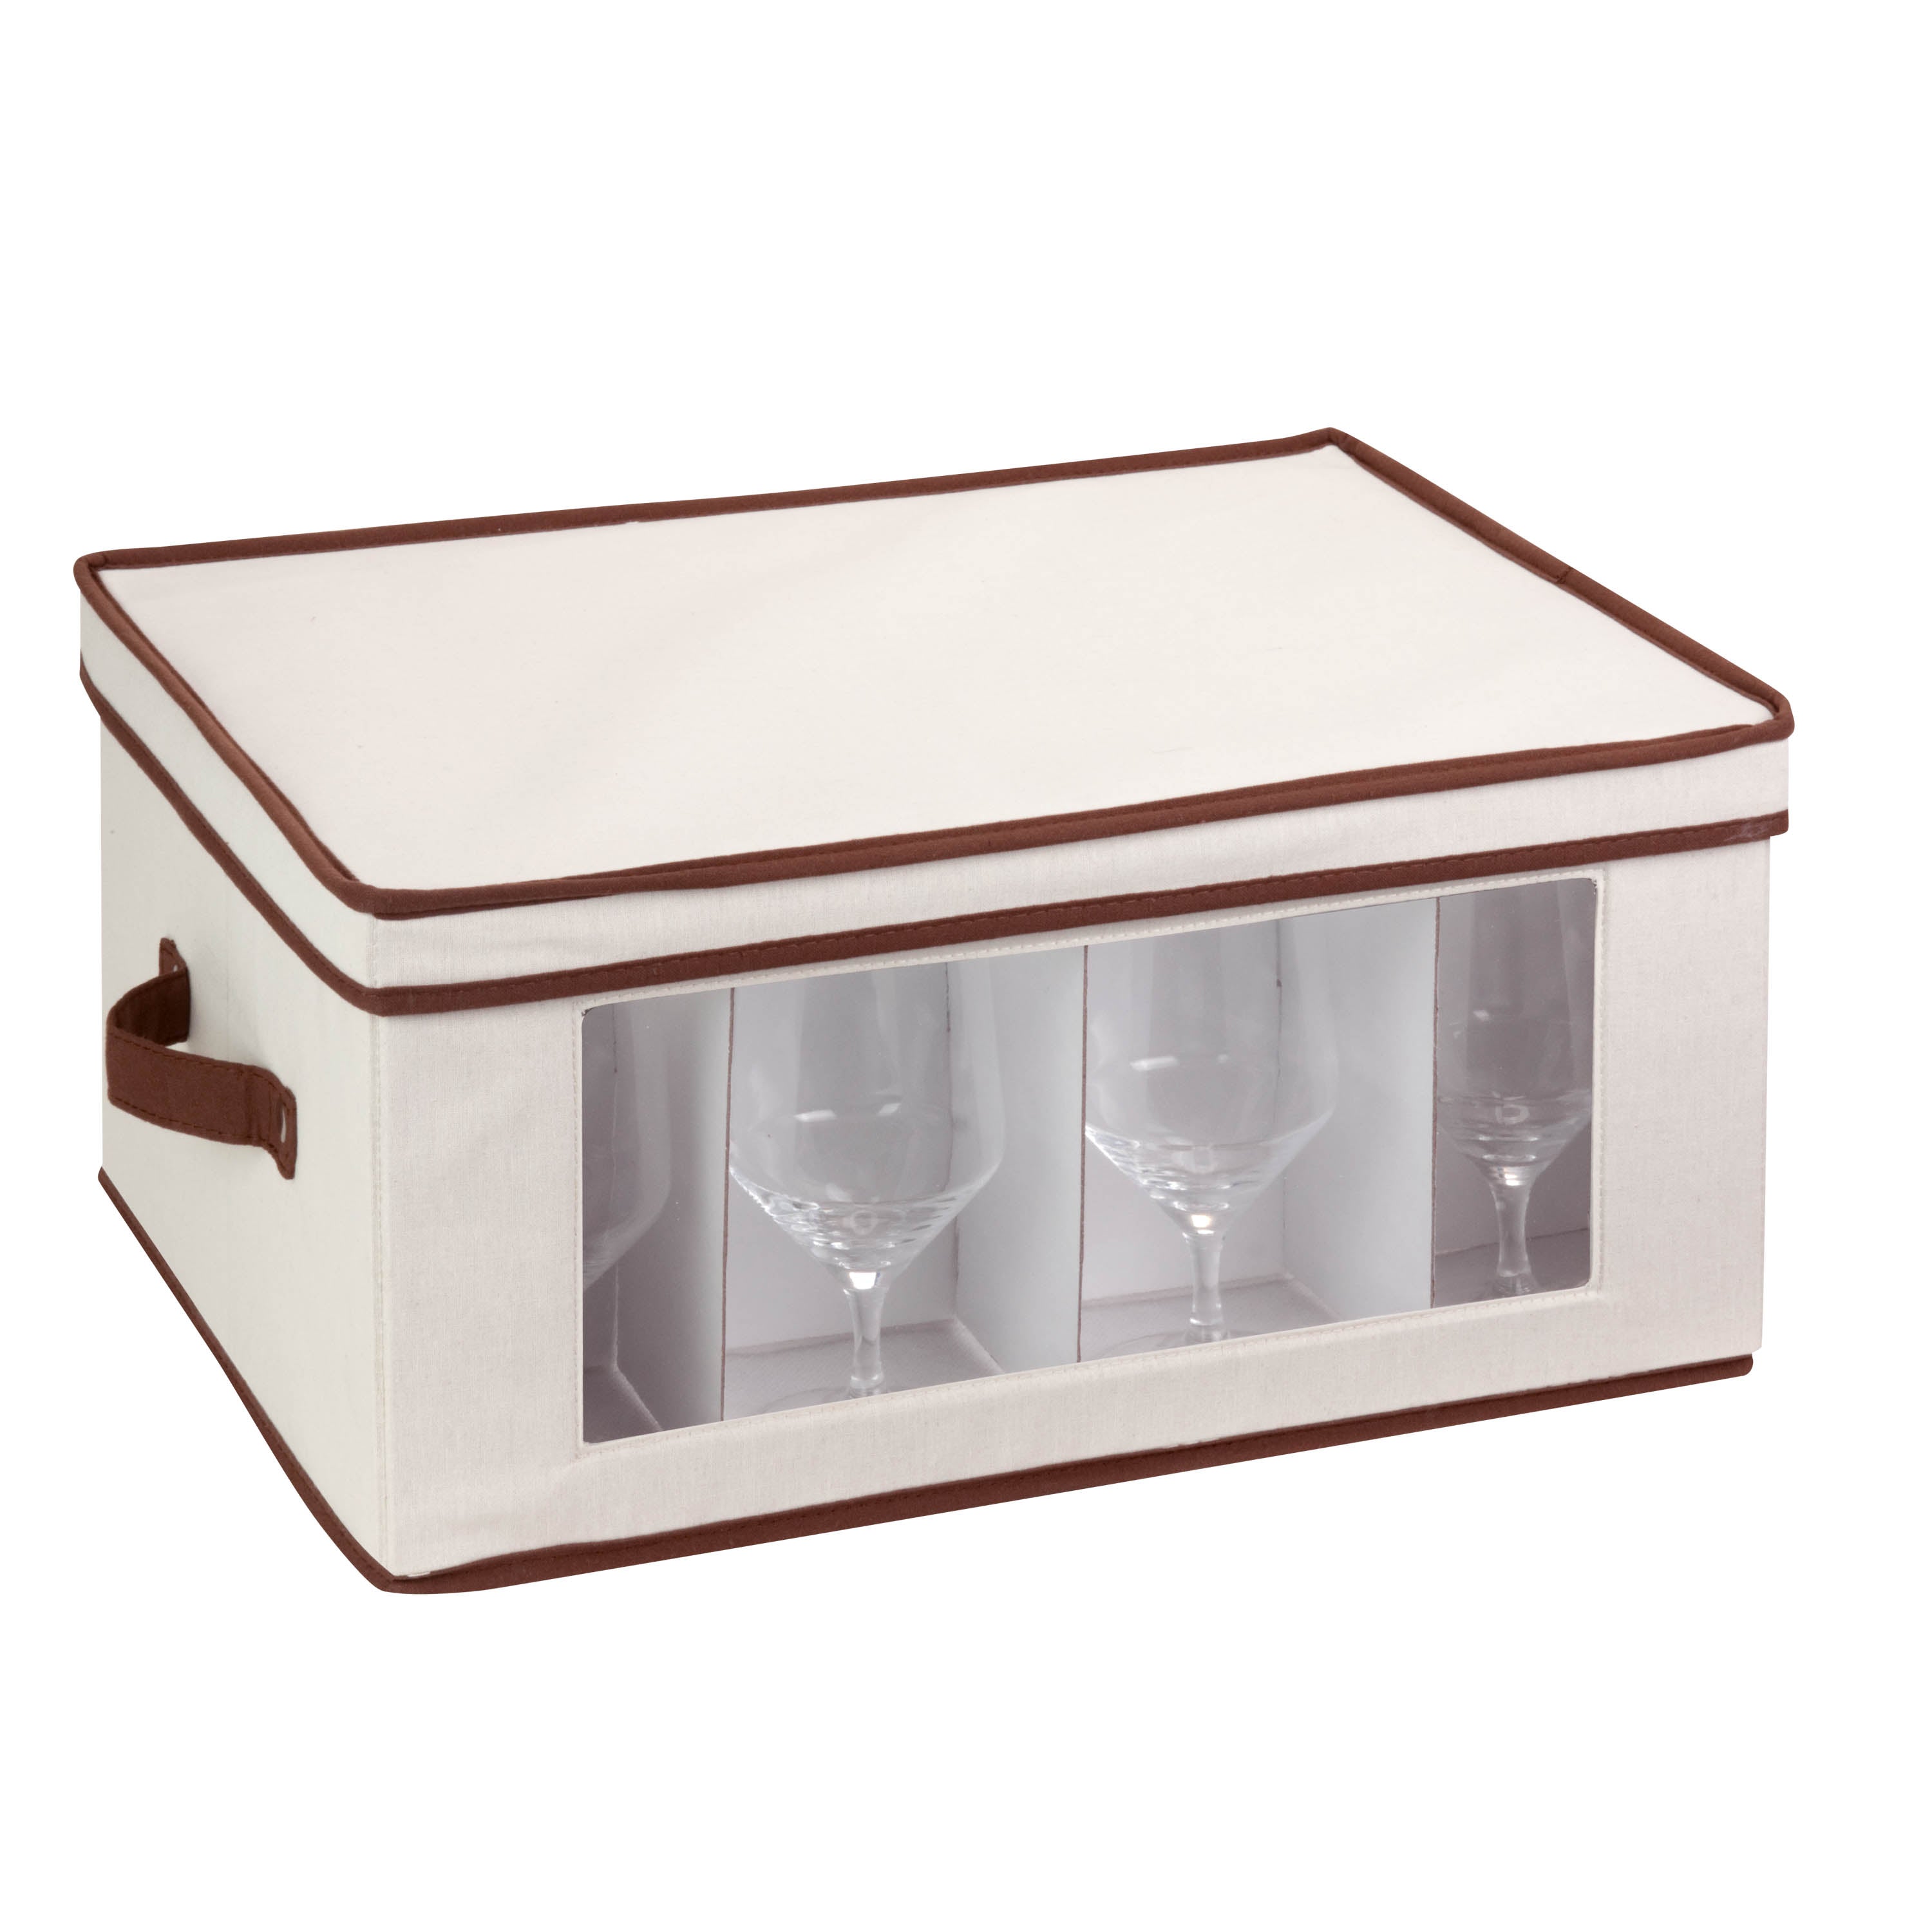 Plastic Pantry Organization and Storage Bins with Dividers - China